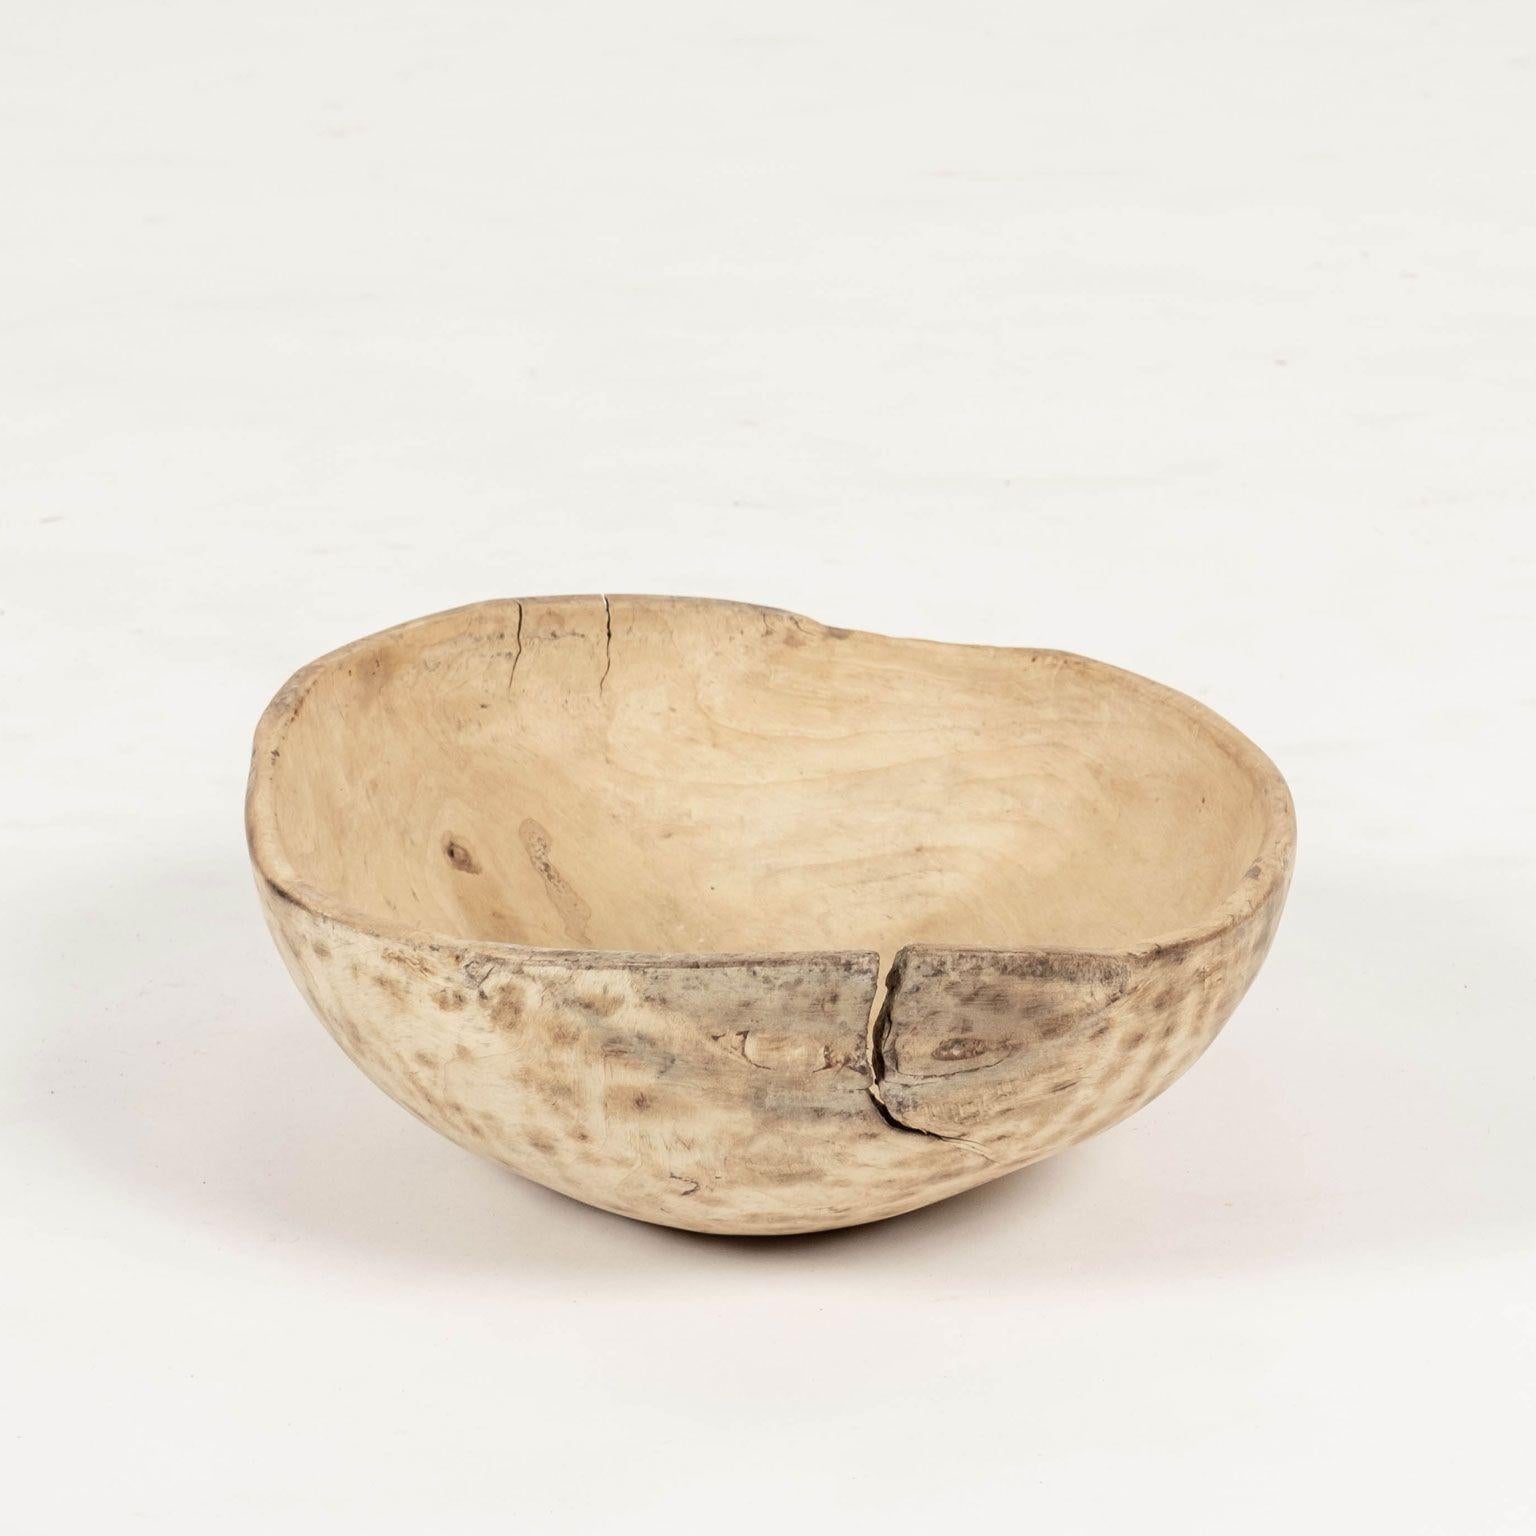 Oval-shaped bleached and scrubbed rustic Swedish dugout bowl, inscribed on bottom 